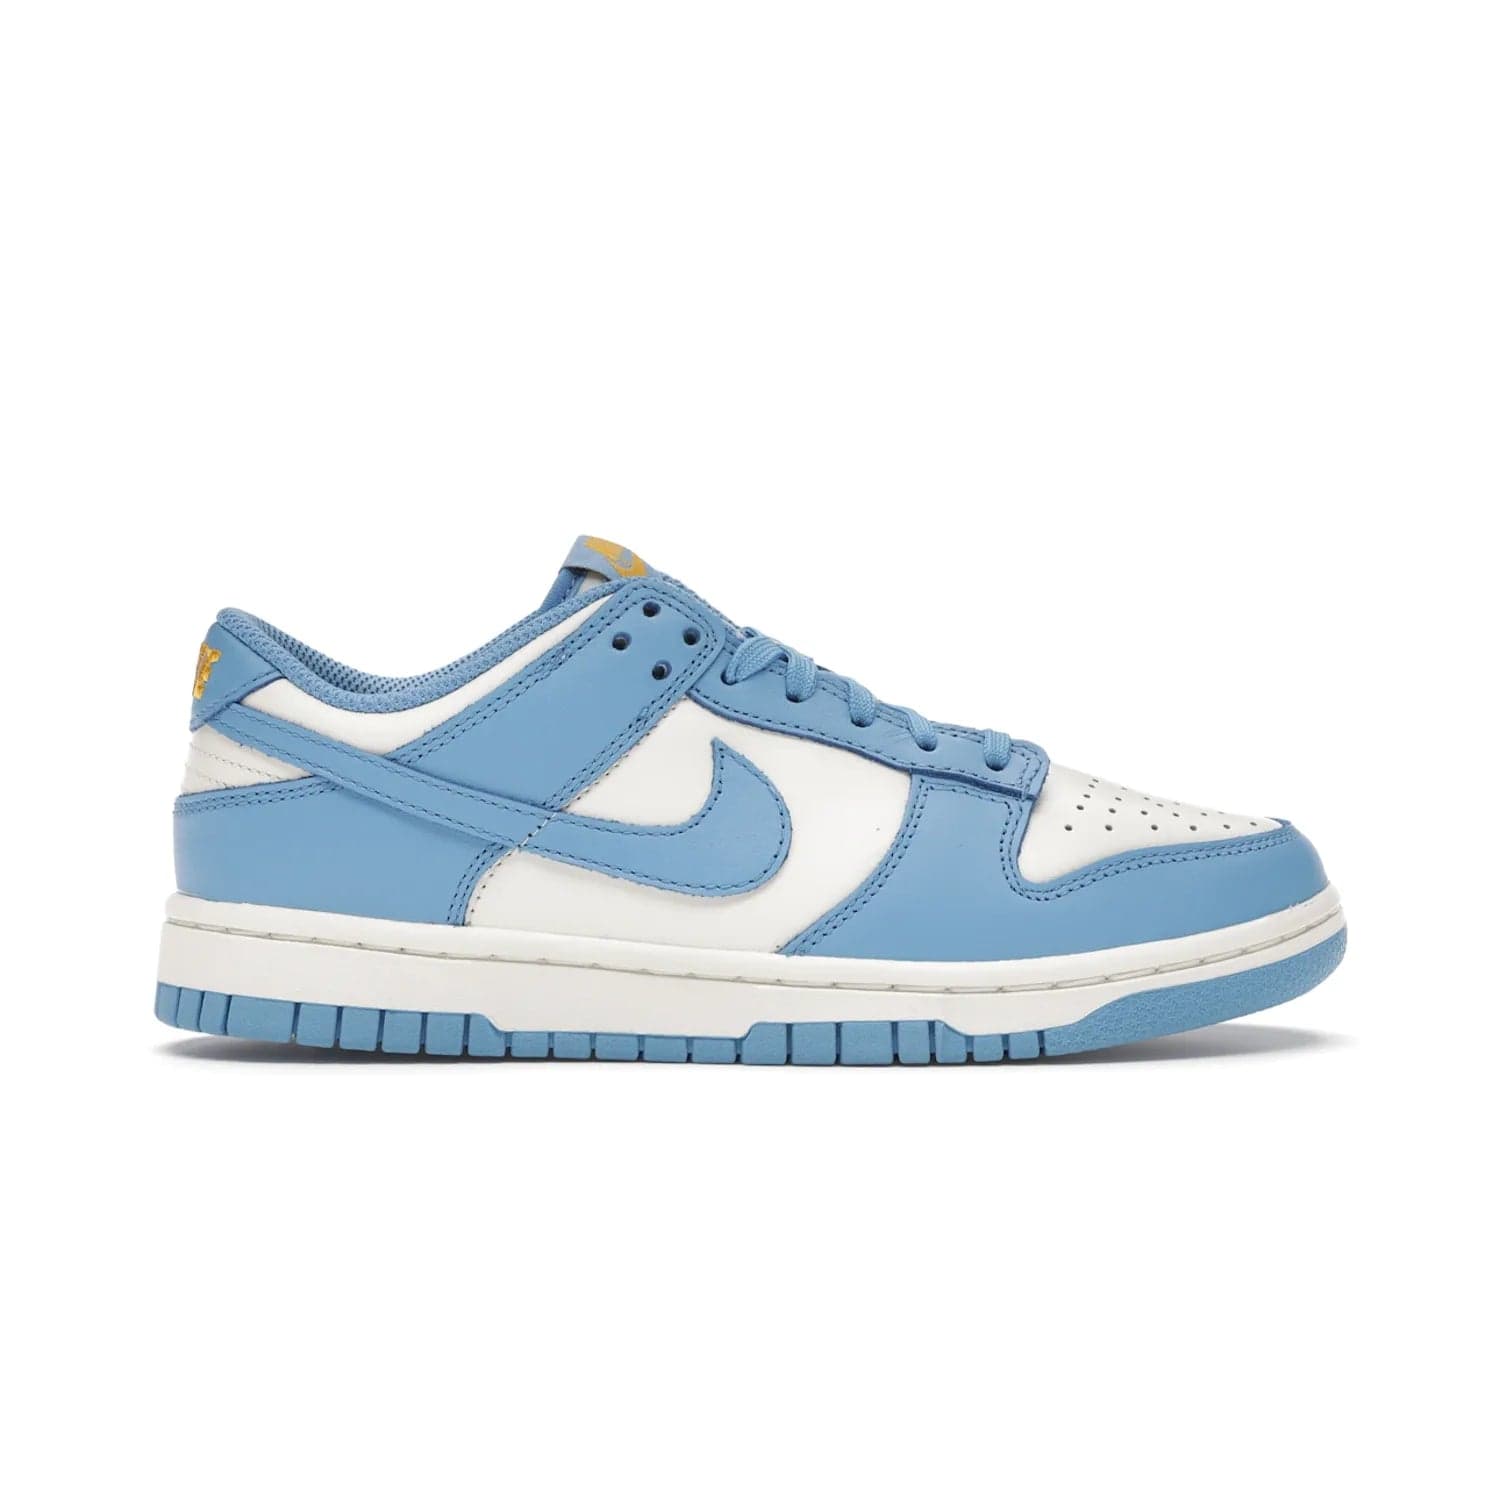 Nike Dunk Low Coast (Women's) - Image 1 - Only at www.BallersClubKickz.com - Iconic UCLA colors honor the west coast with the Nike Dunk Low Coast (Women's), a bold combo of light blue, white and yellow. Light leather upper with white midsole and light EVA outsole offer a modern twist. Released Feb 2021 for $100.